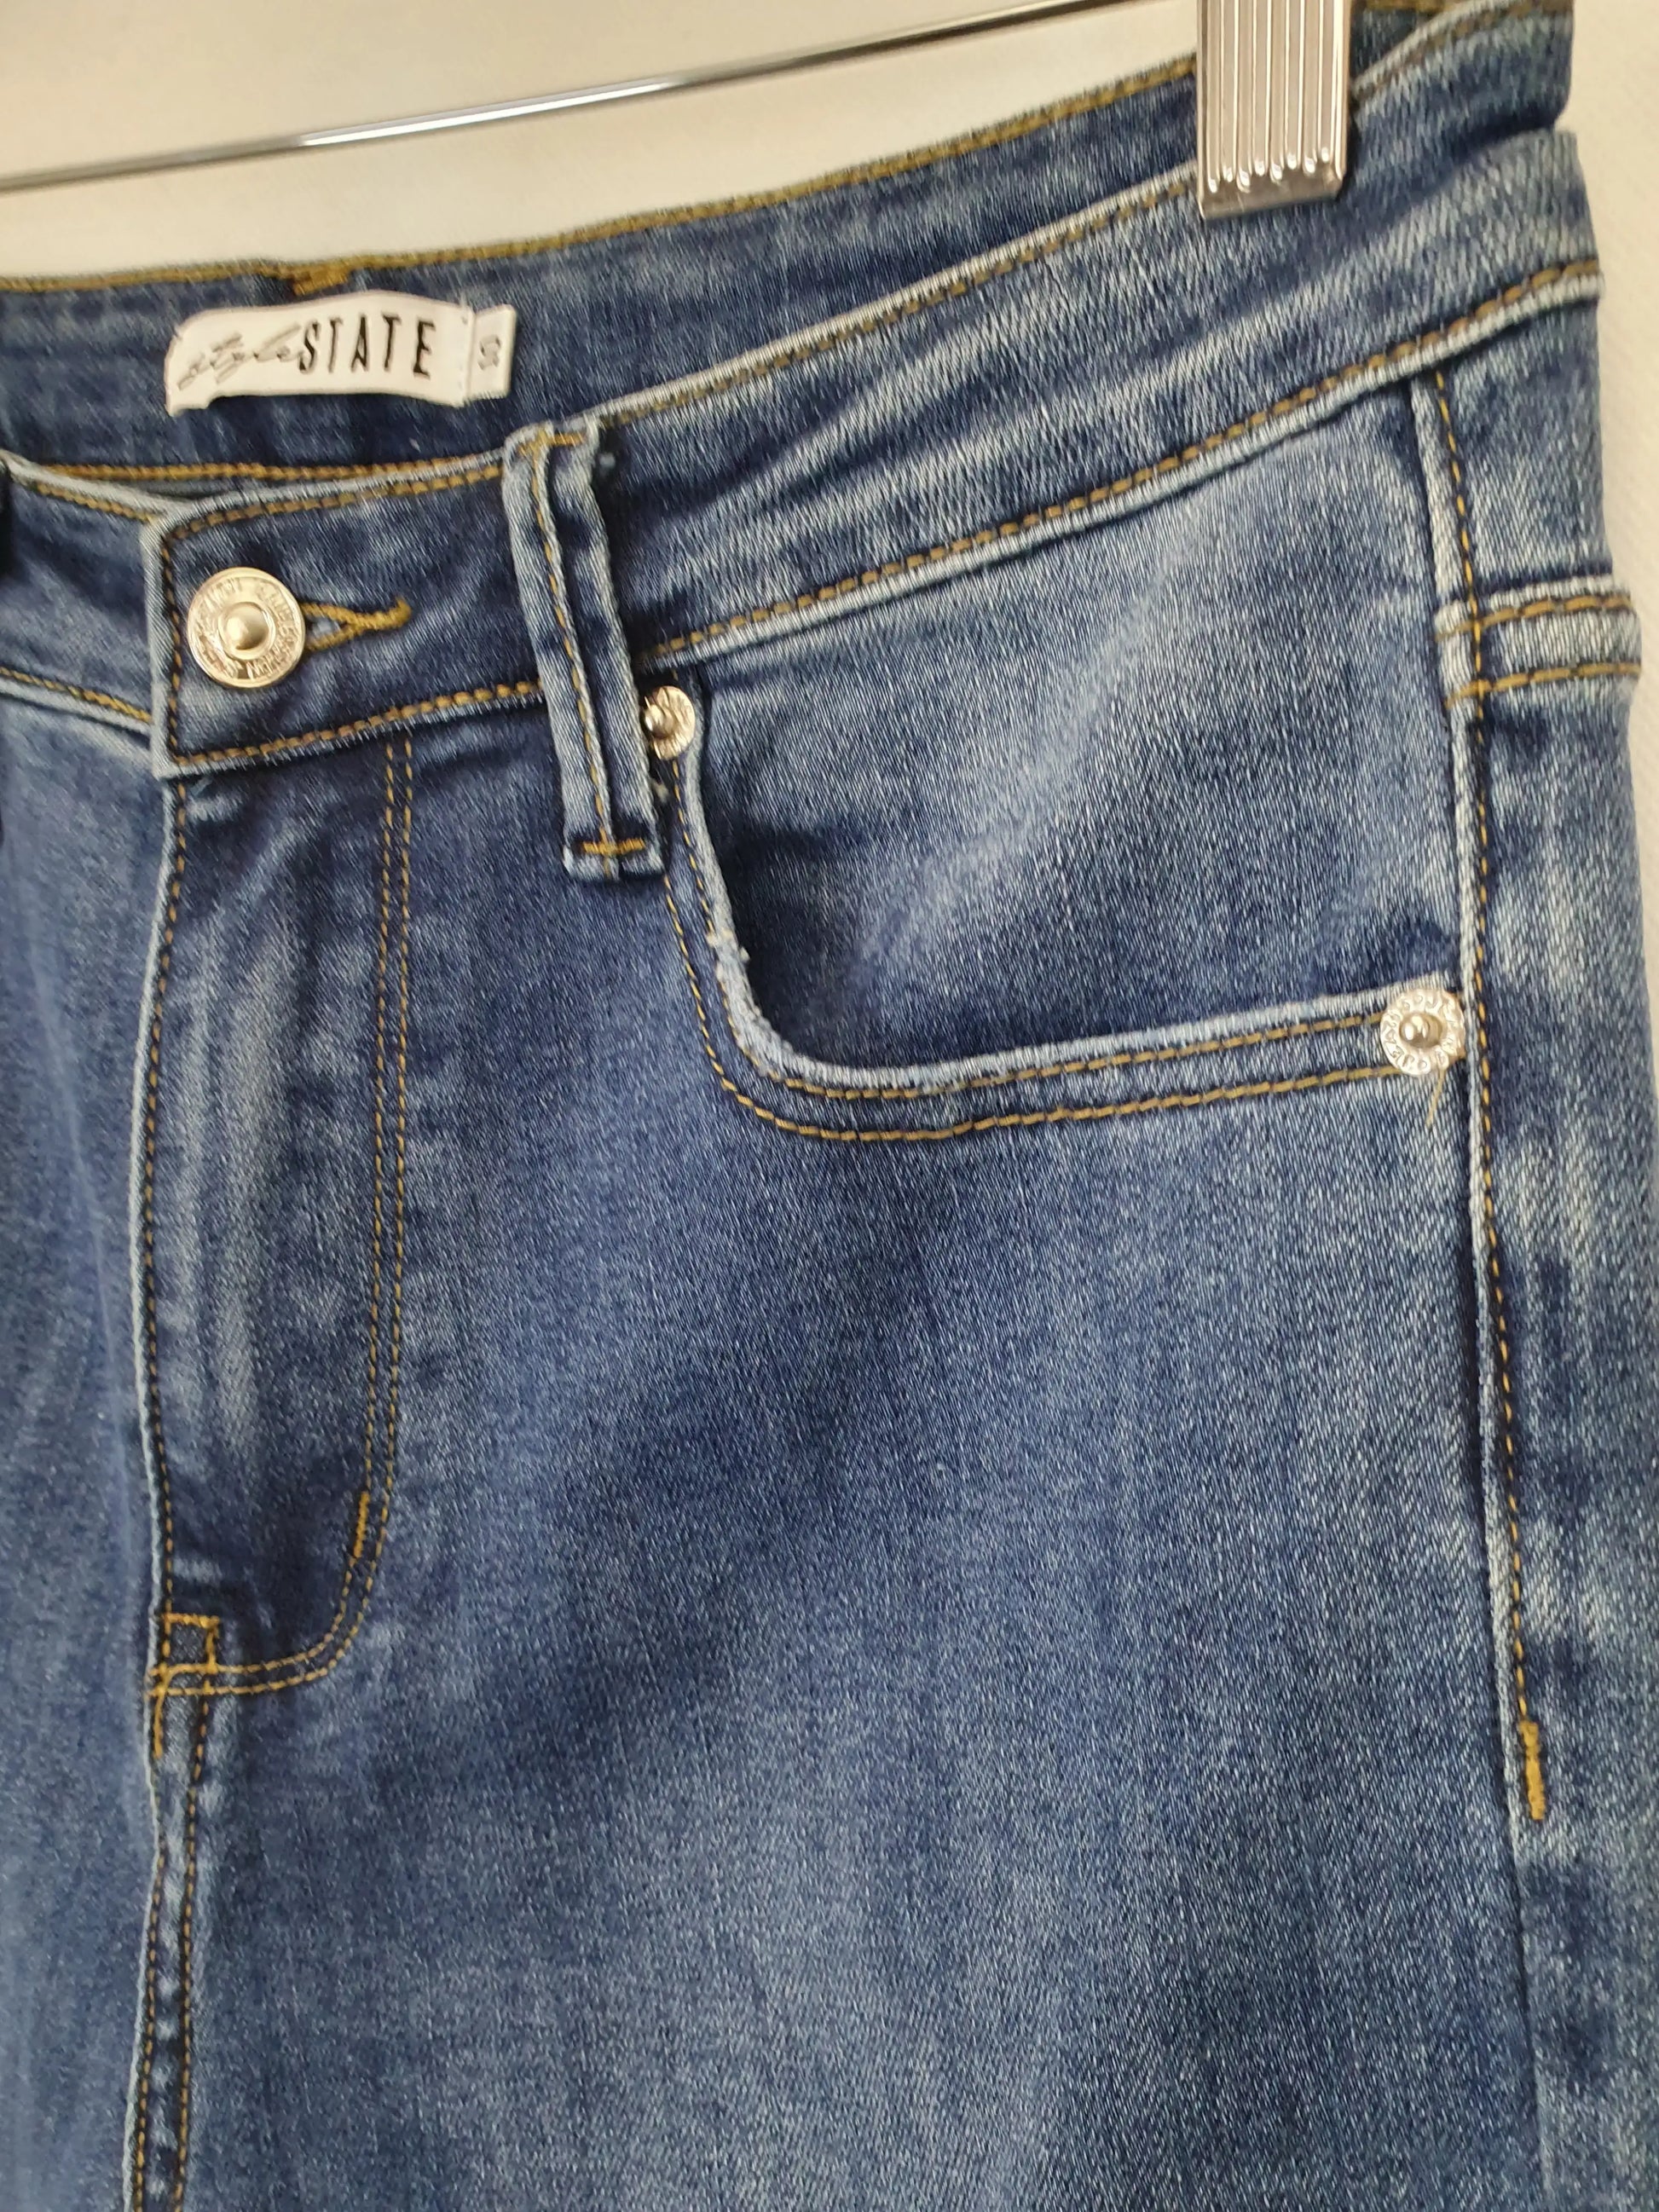 Style State Denim Everyday Essential Jeans Size 10 by SwapUp-Online Second Hand Store-Online Thrift Store